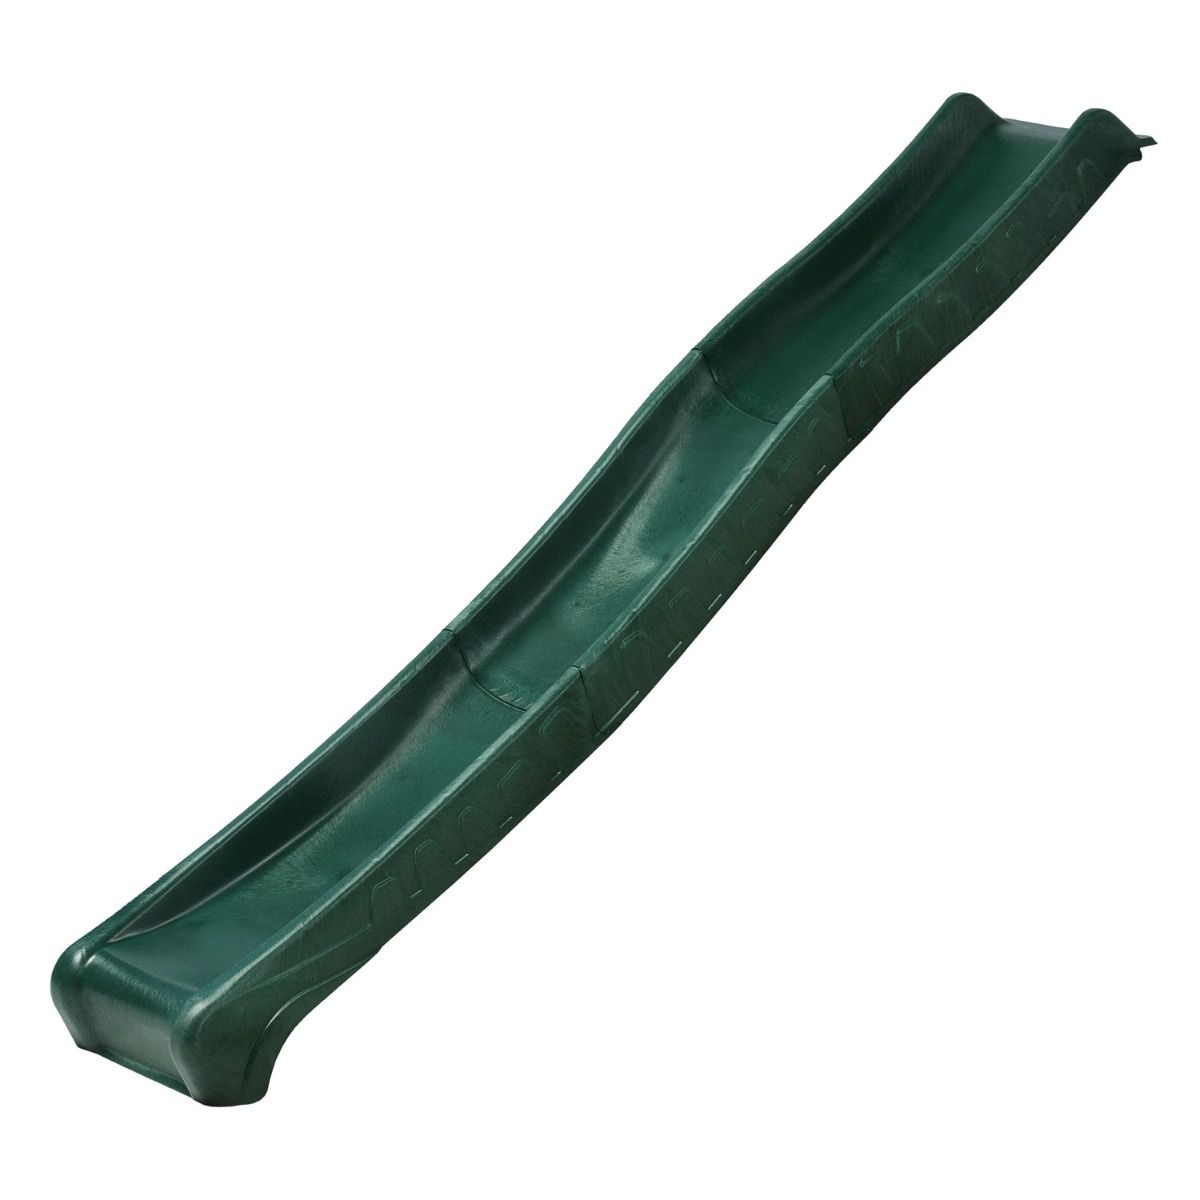 Slide with water connection - Length 2.87 m - Color: Green